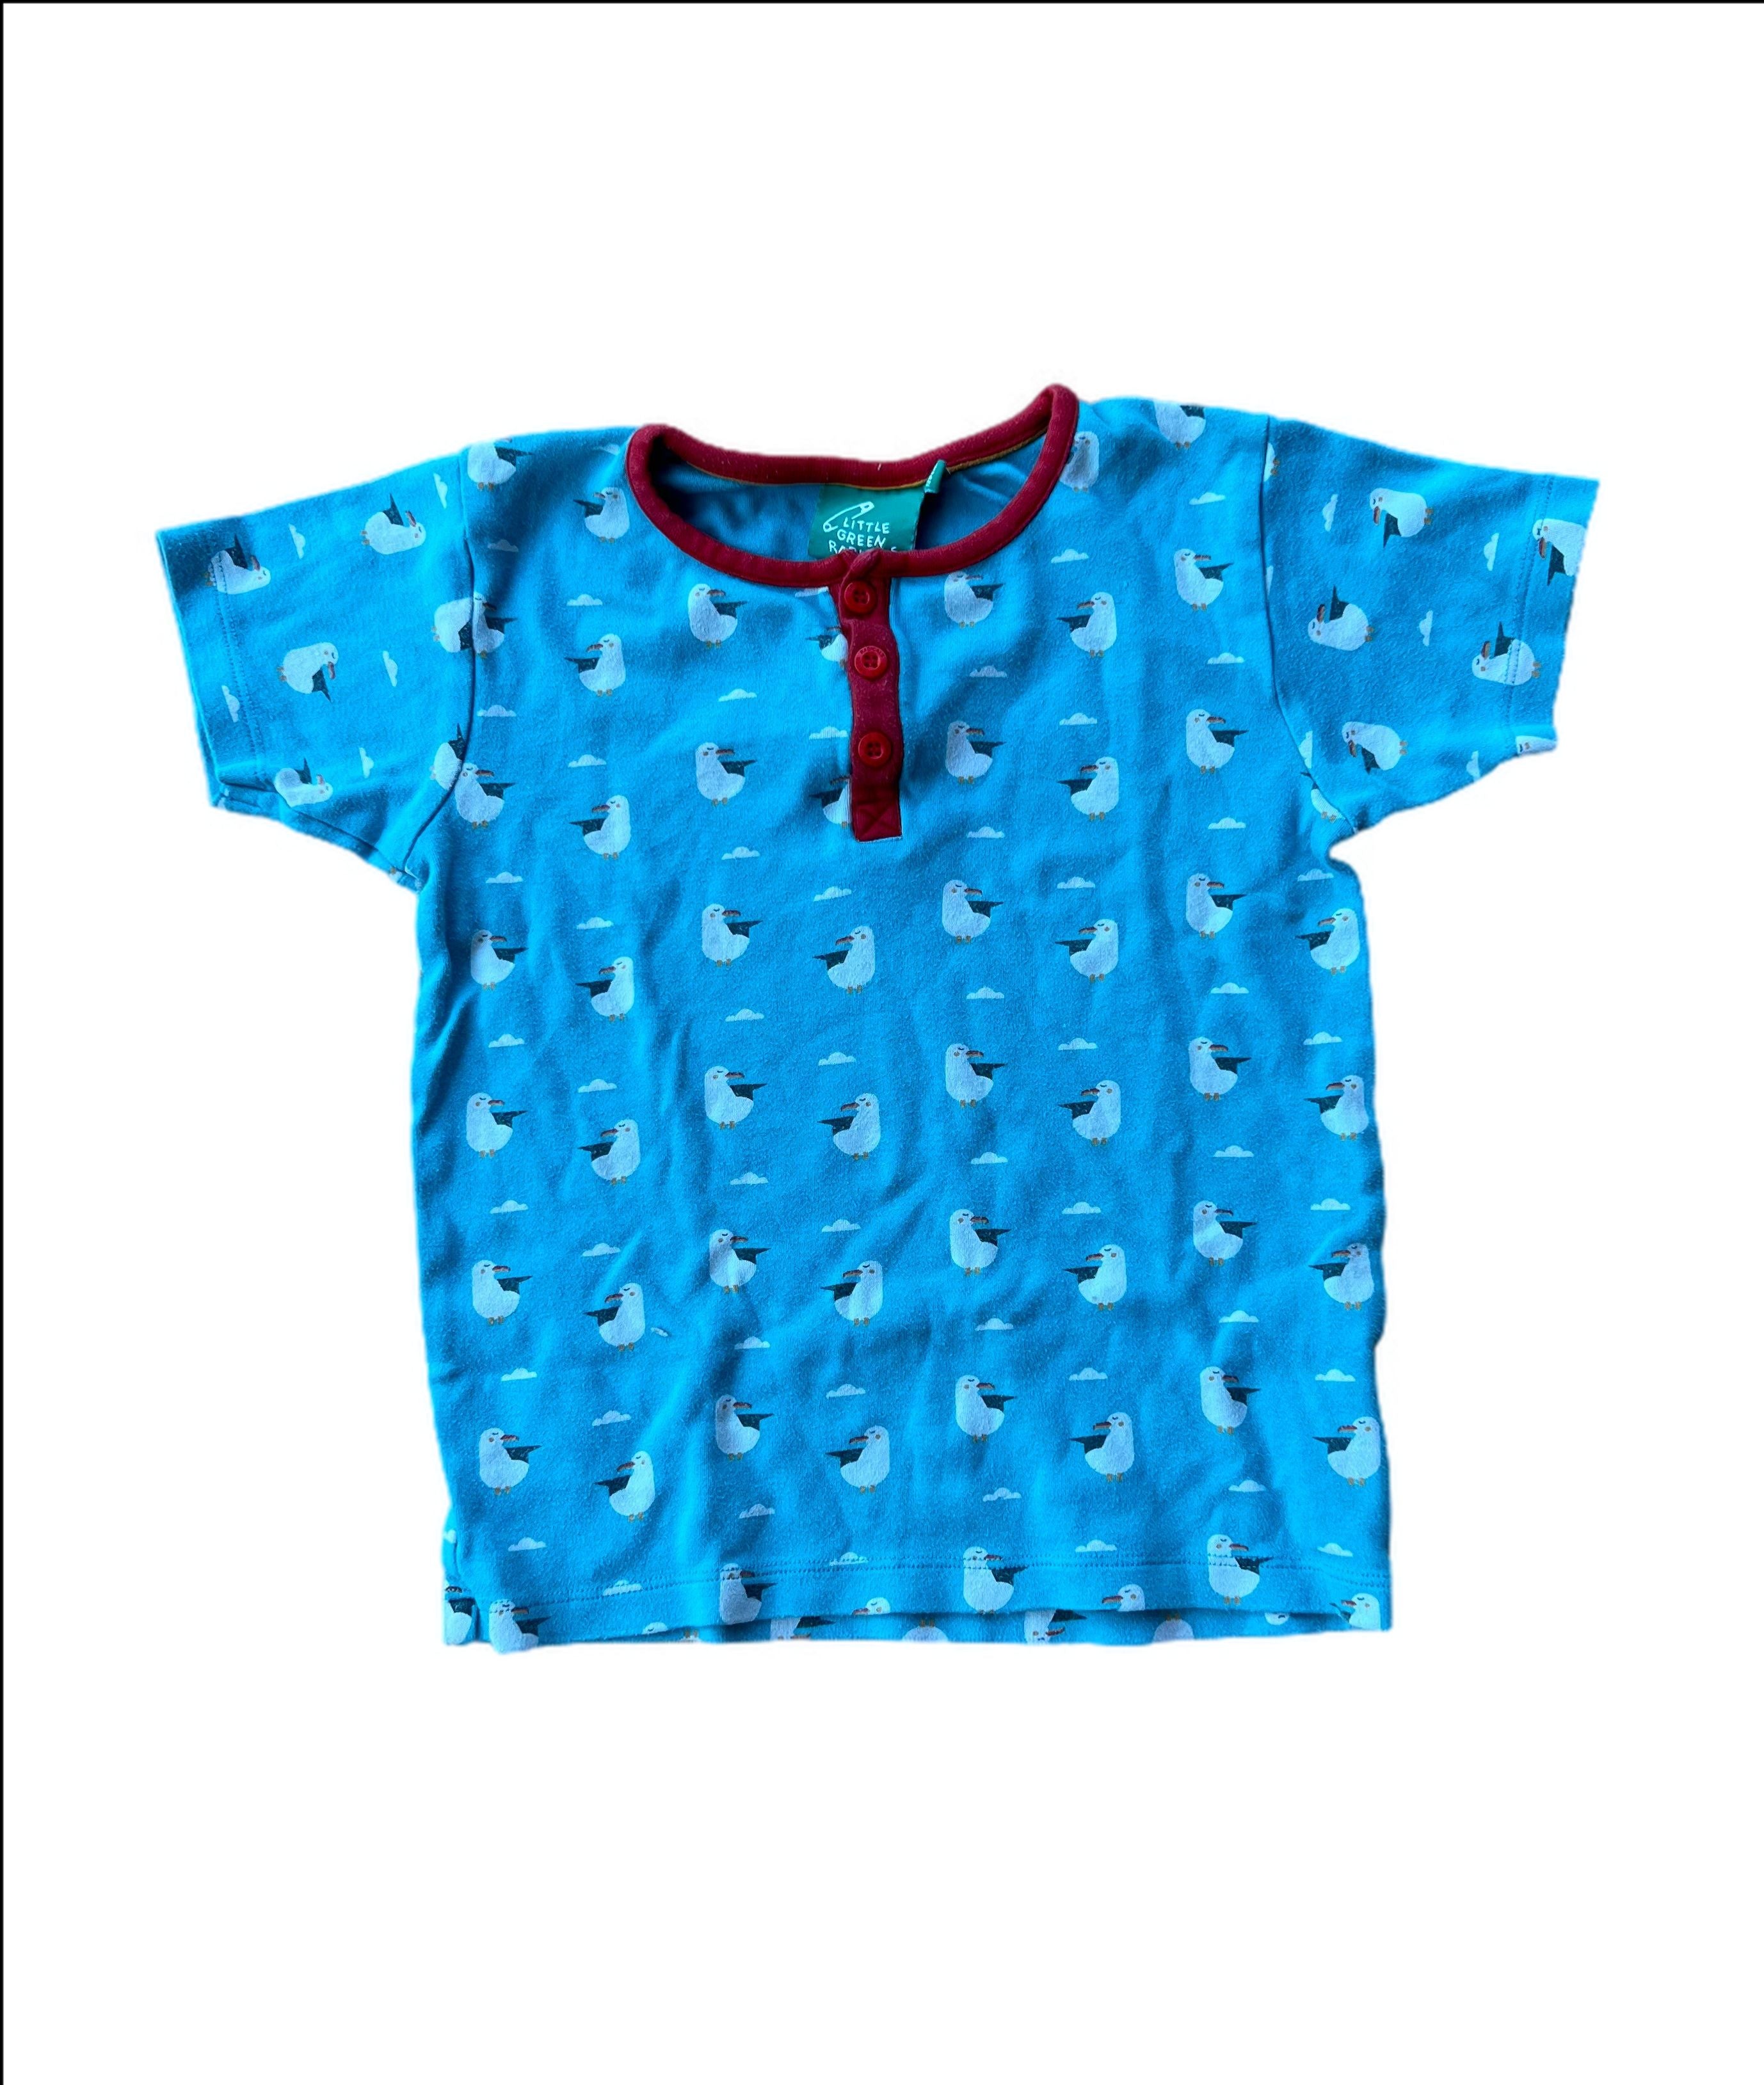 Shortsleeve button top with seagull print